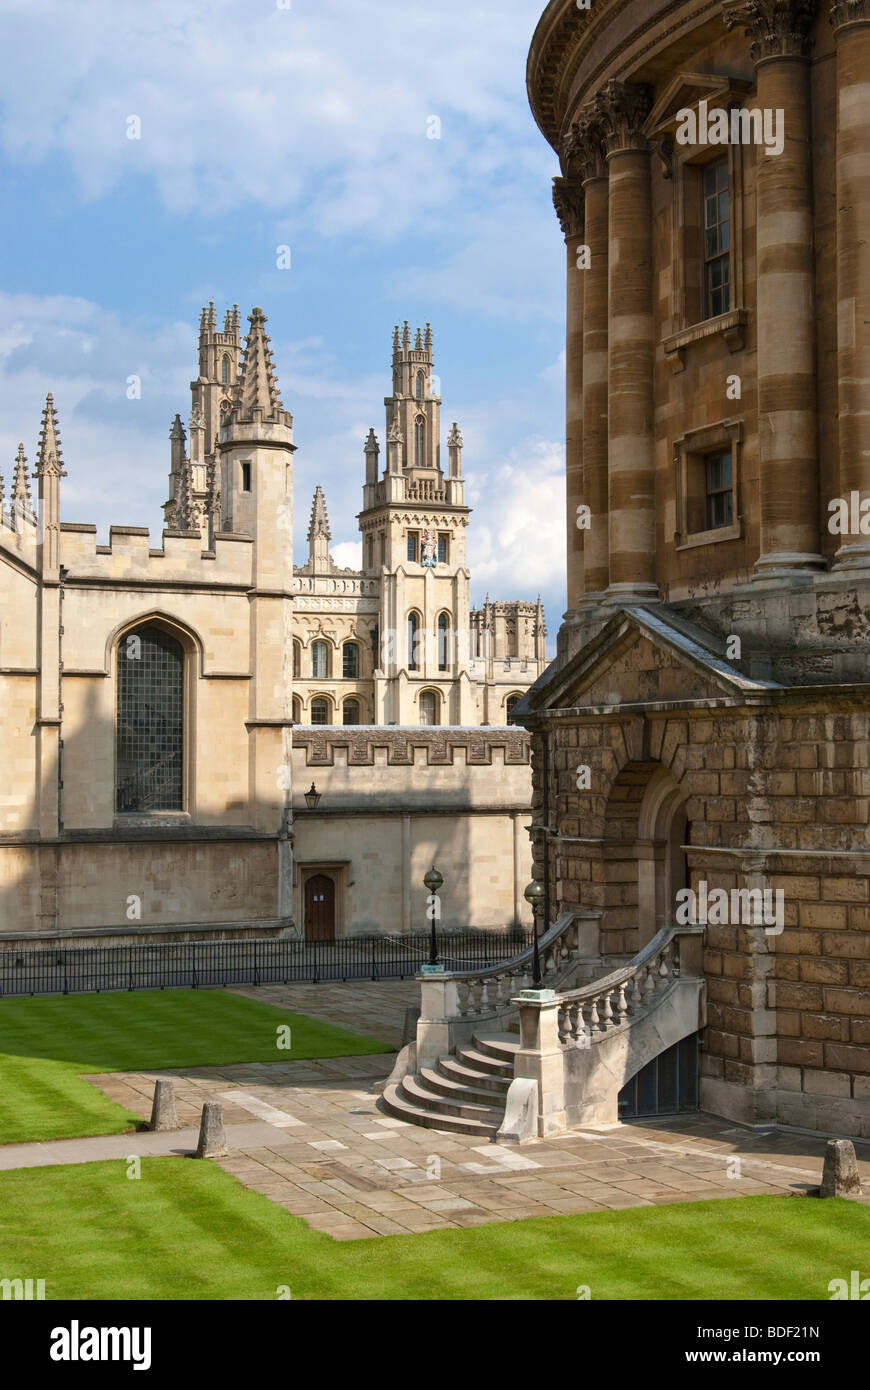 Radcliffe Square with a partial view of the Radcliffe Camera and All Soul's College Oxford England UK Stock Photo